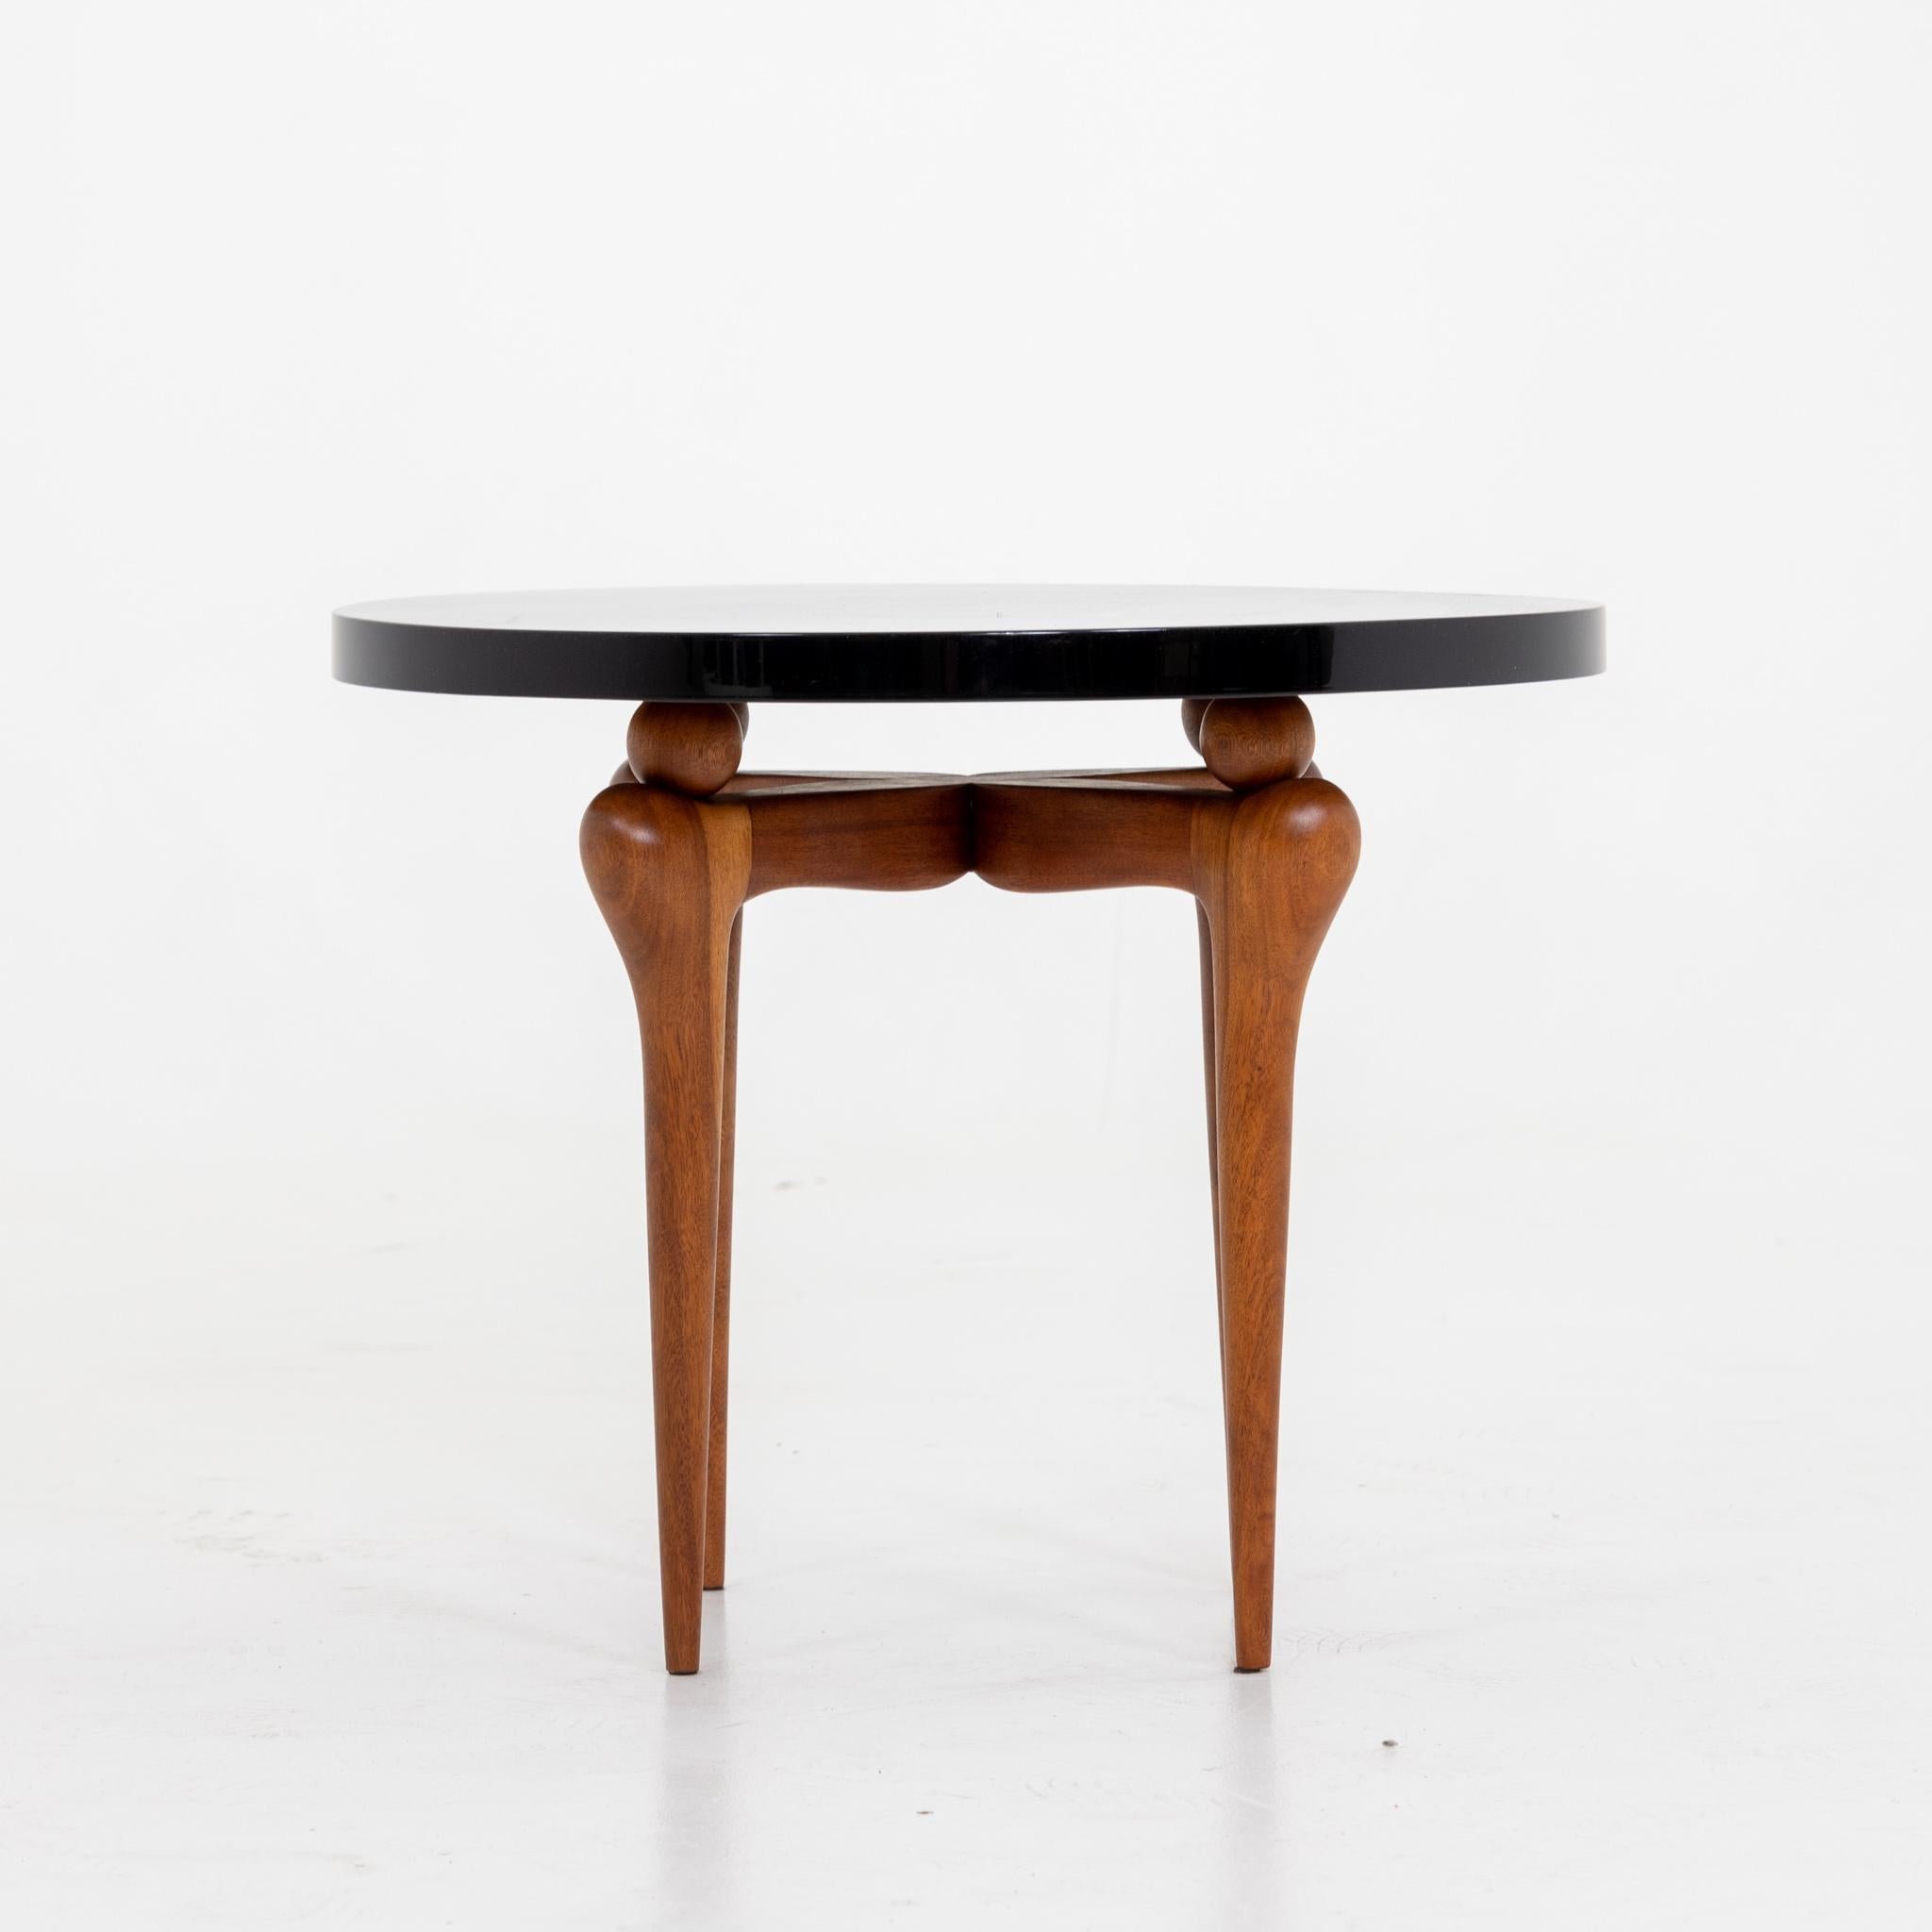 An Italian Modernist small round side table. 
Black lacquer top with walnut legs.